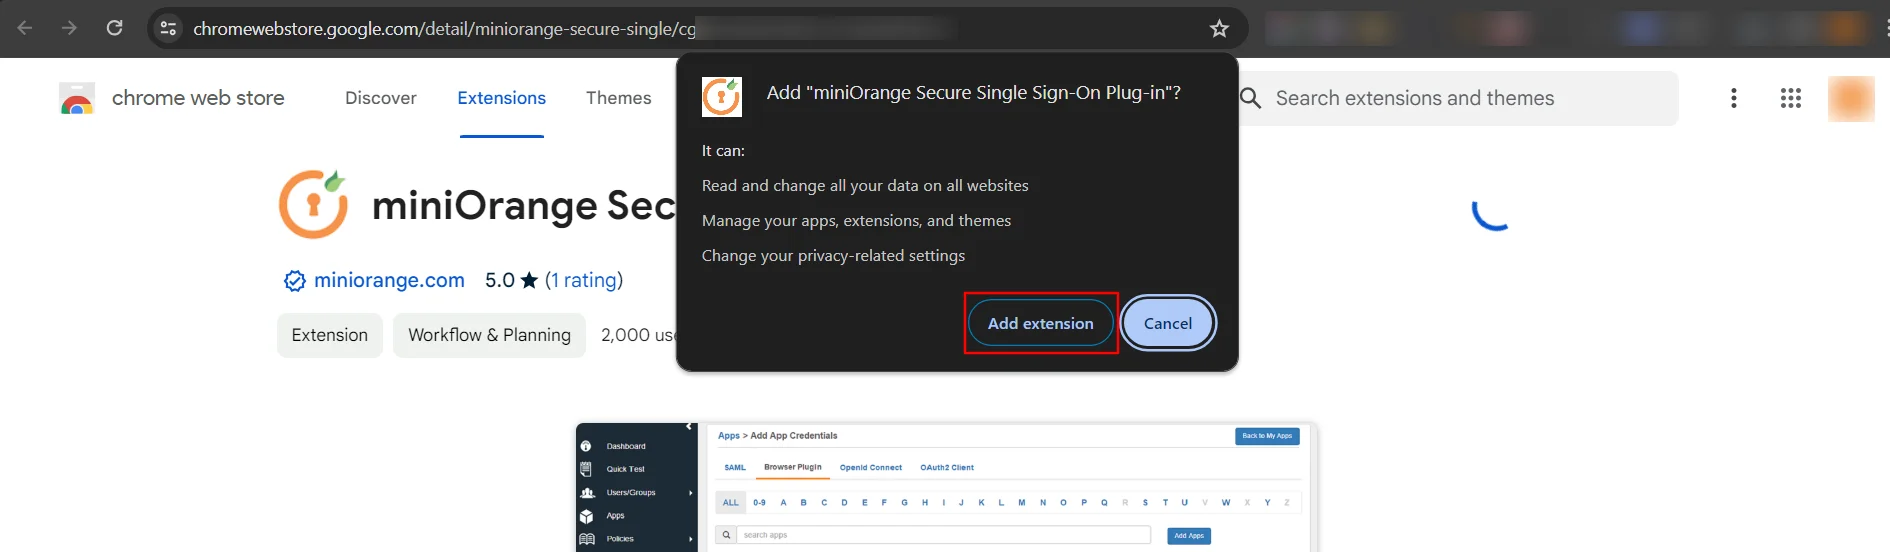 Google Analytics Single Sign-On (sso) extension added in chrome